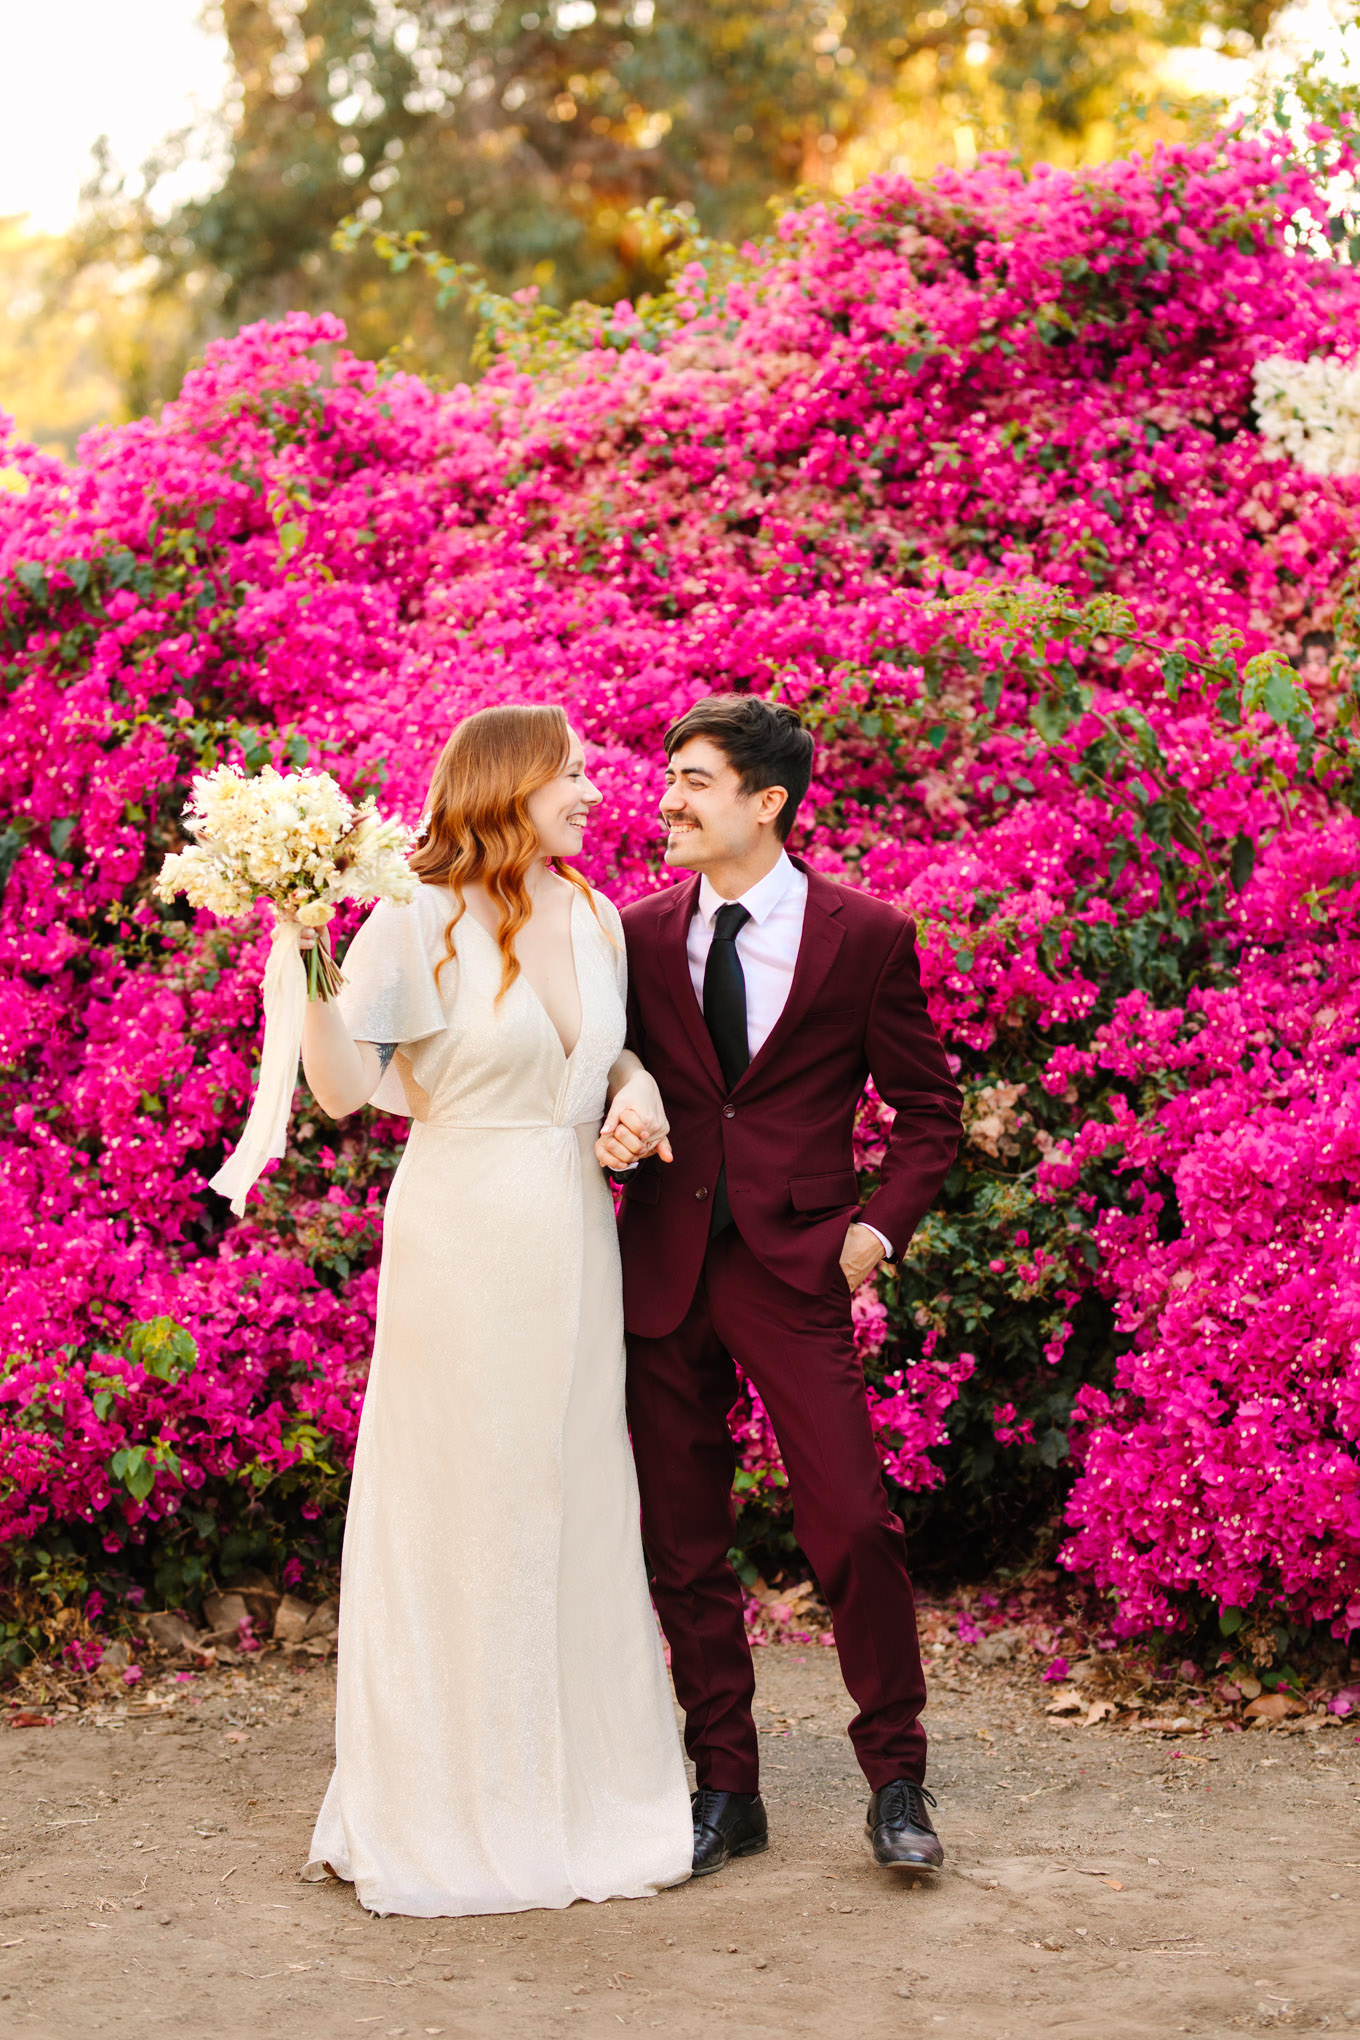 Los Angeles Arboretum elopement with bougainvillea | Engagement, elopement, and wedding photography roundup of Mary Costa’s favorite images from 2020 | Colorful and elevated photography for fun-loving couples in Southern California | #2020wedding #elopement #weddingphoto #weddingphotography #microwedding   Source: Mary Costa Photography | Los Angeles